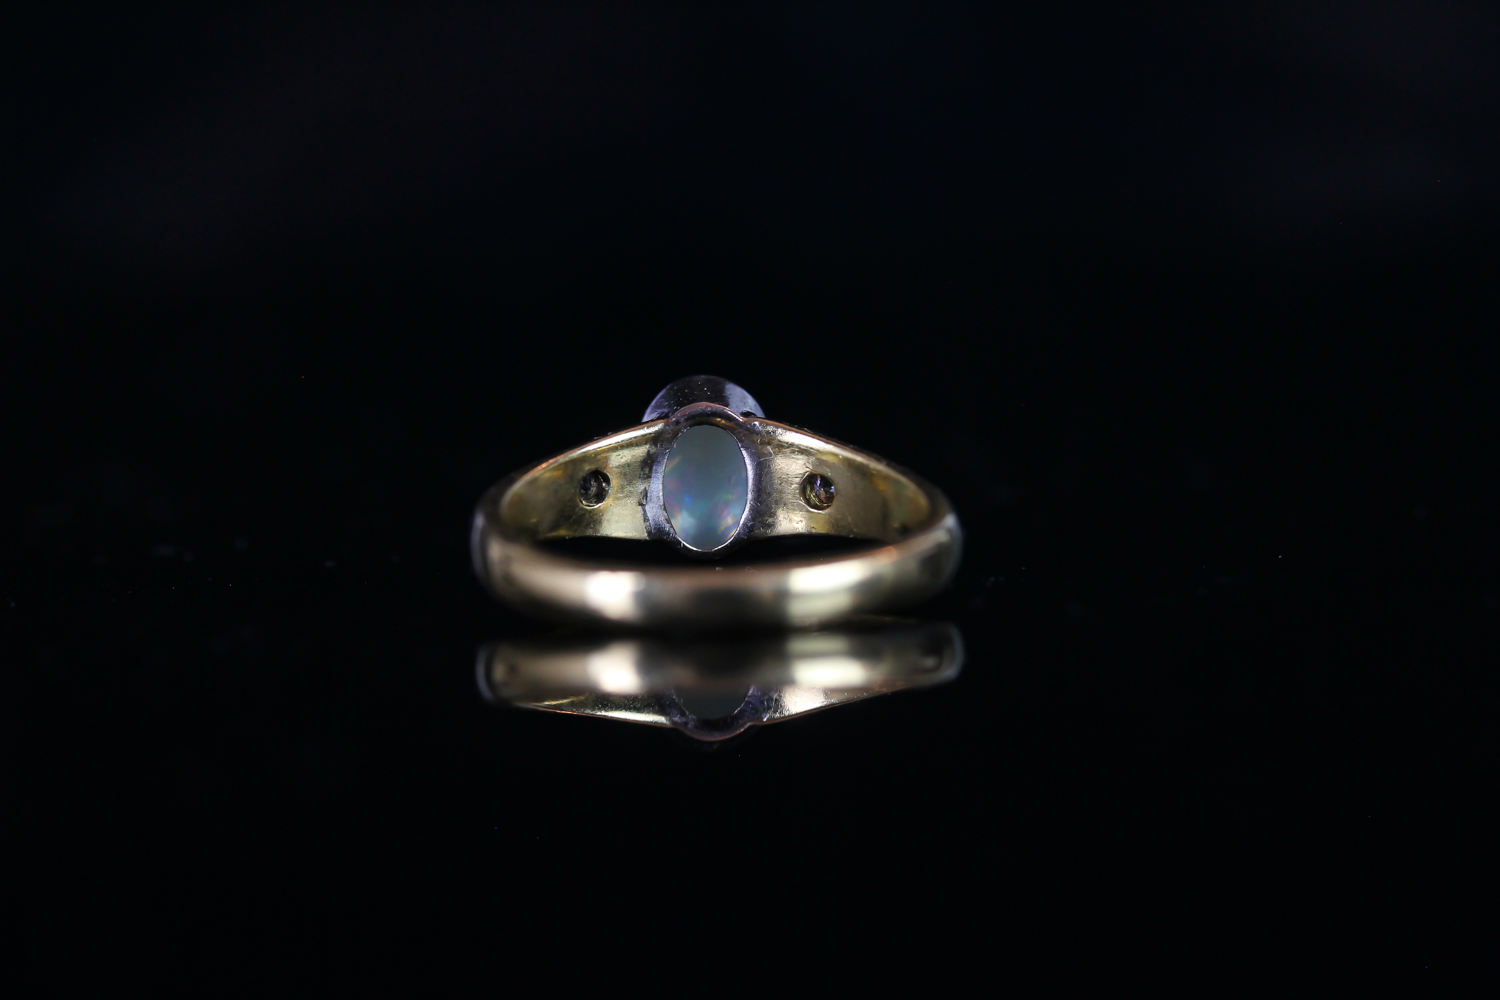 18CT OPAL AND DIAMOND RING, centre stone estimated 8x5mm, total weight 3.9 gms, size M. - Image 3 of 3